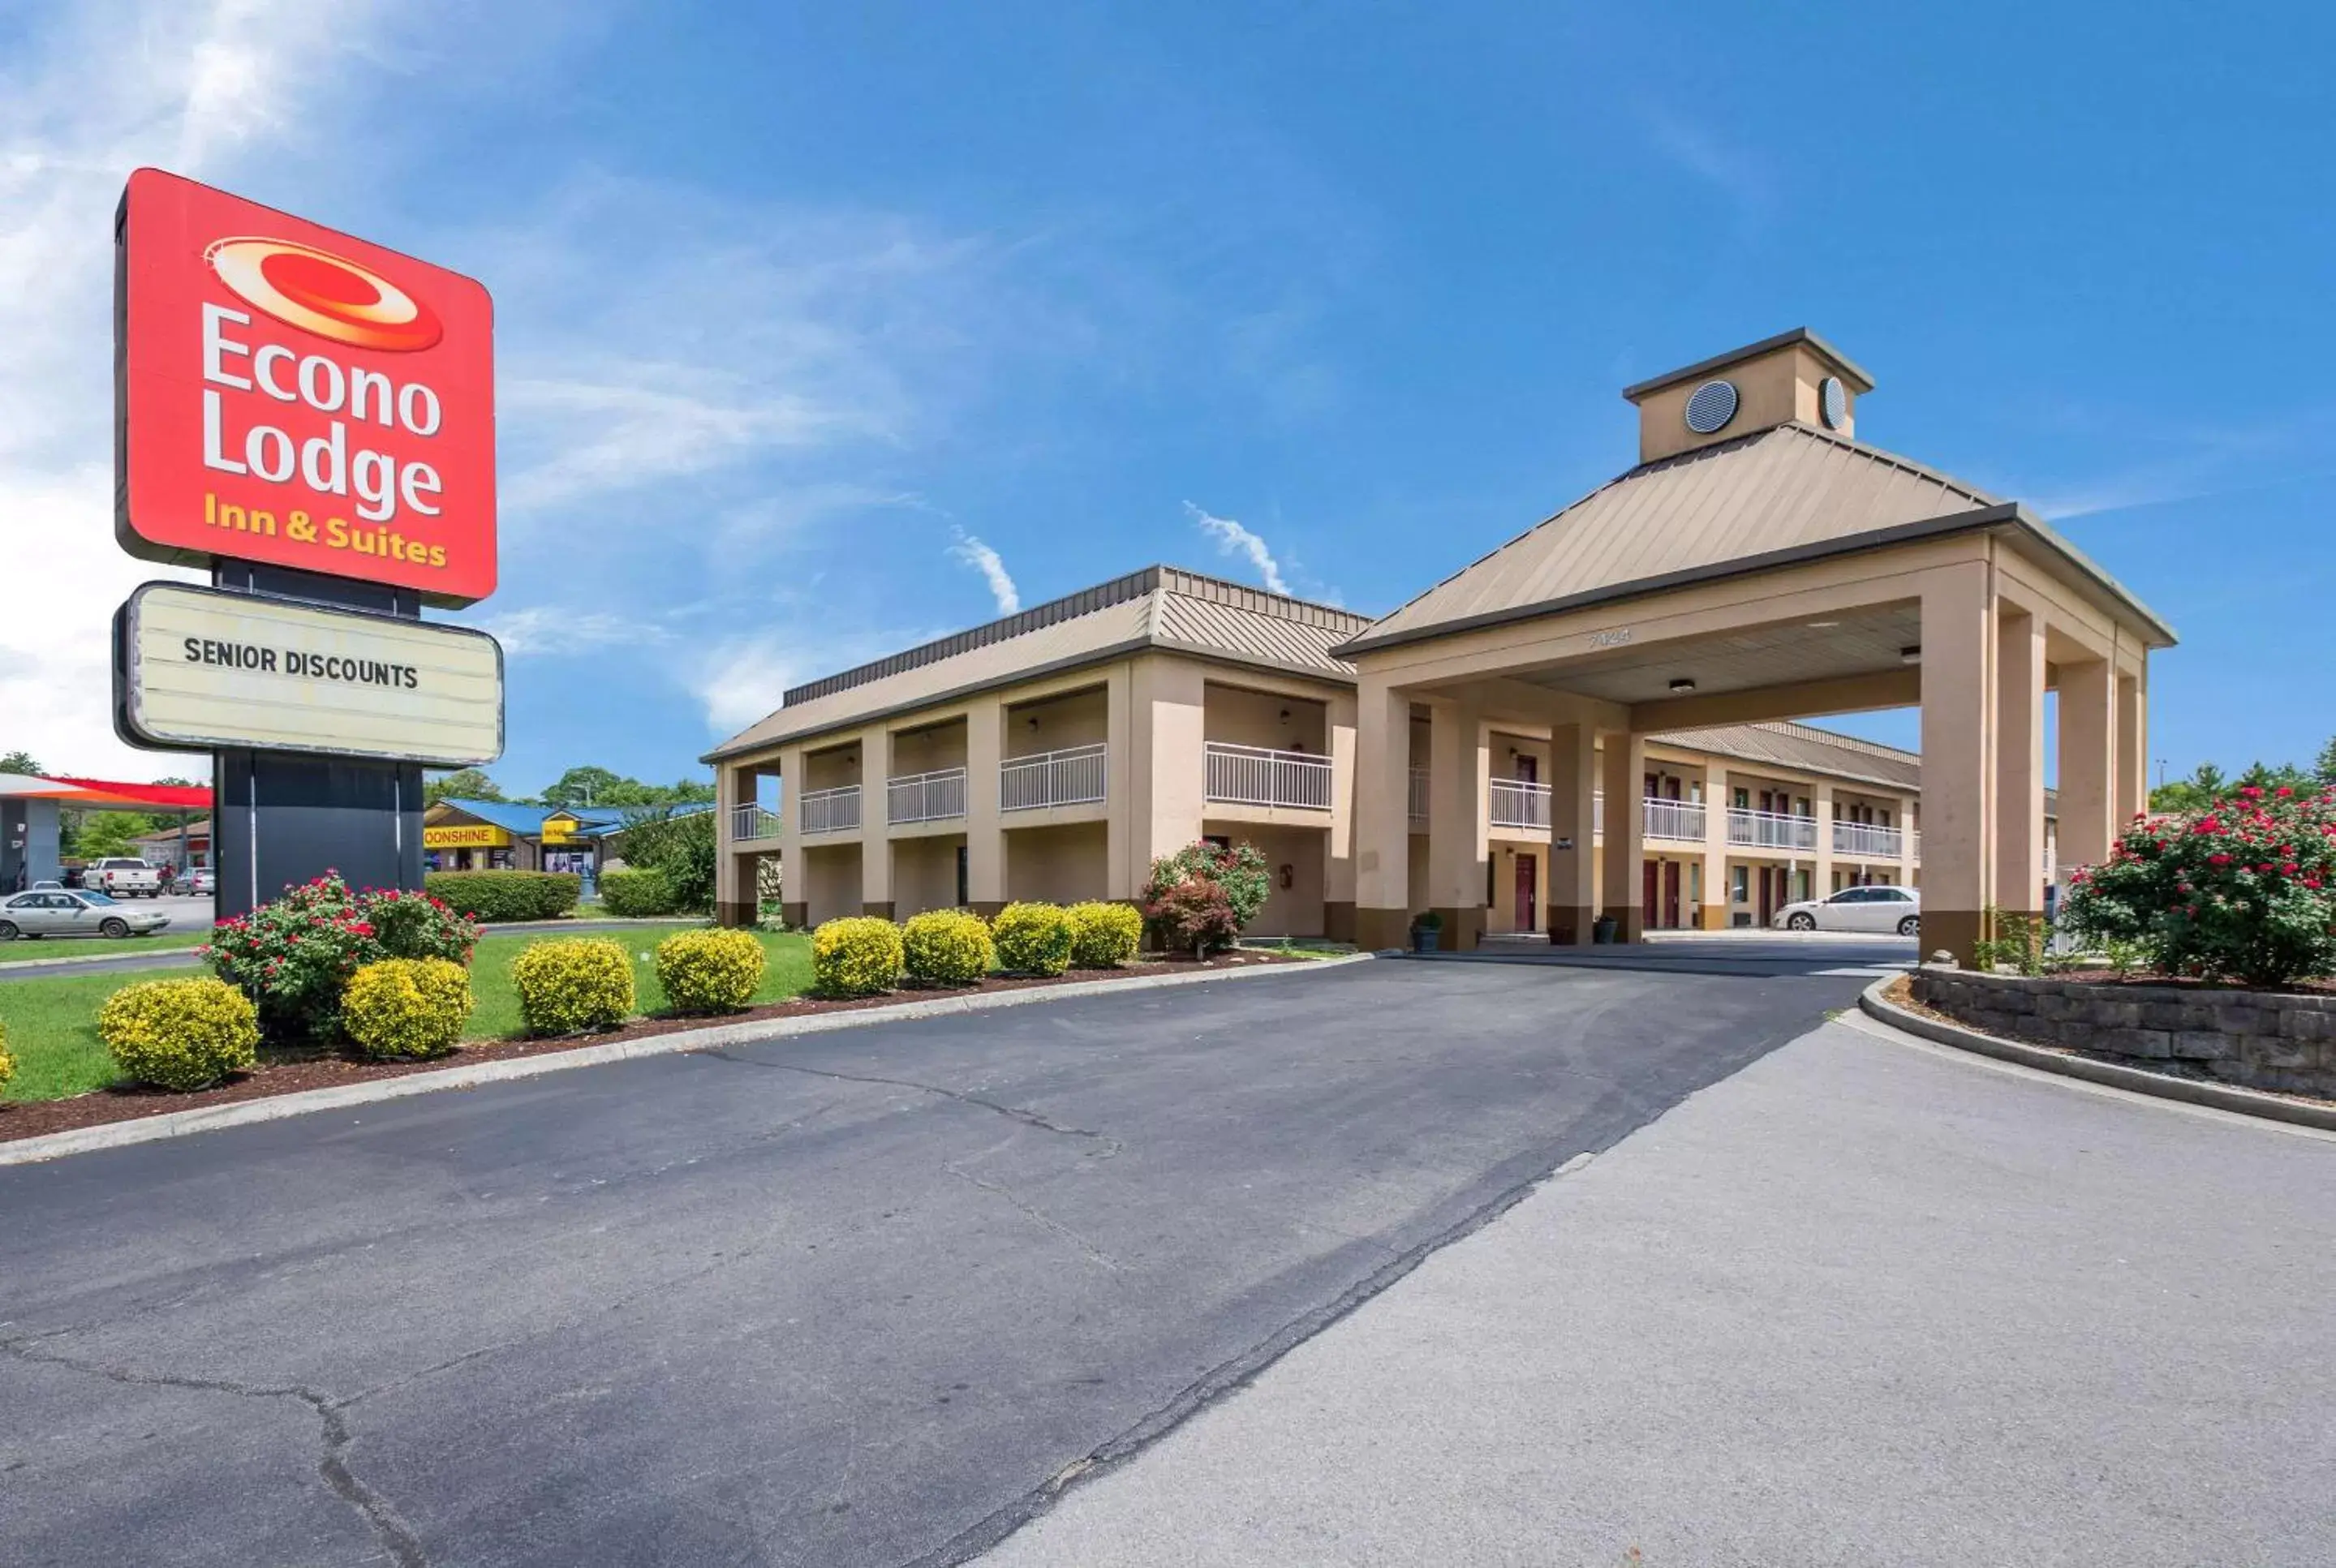 Property building, Facade/Entrance in Econo Lodge Inn And Suites East